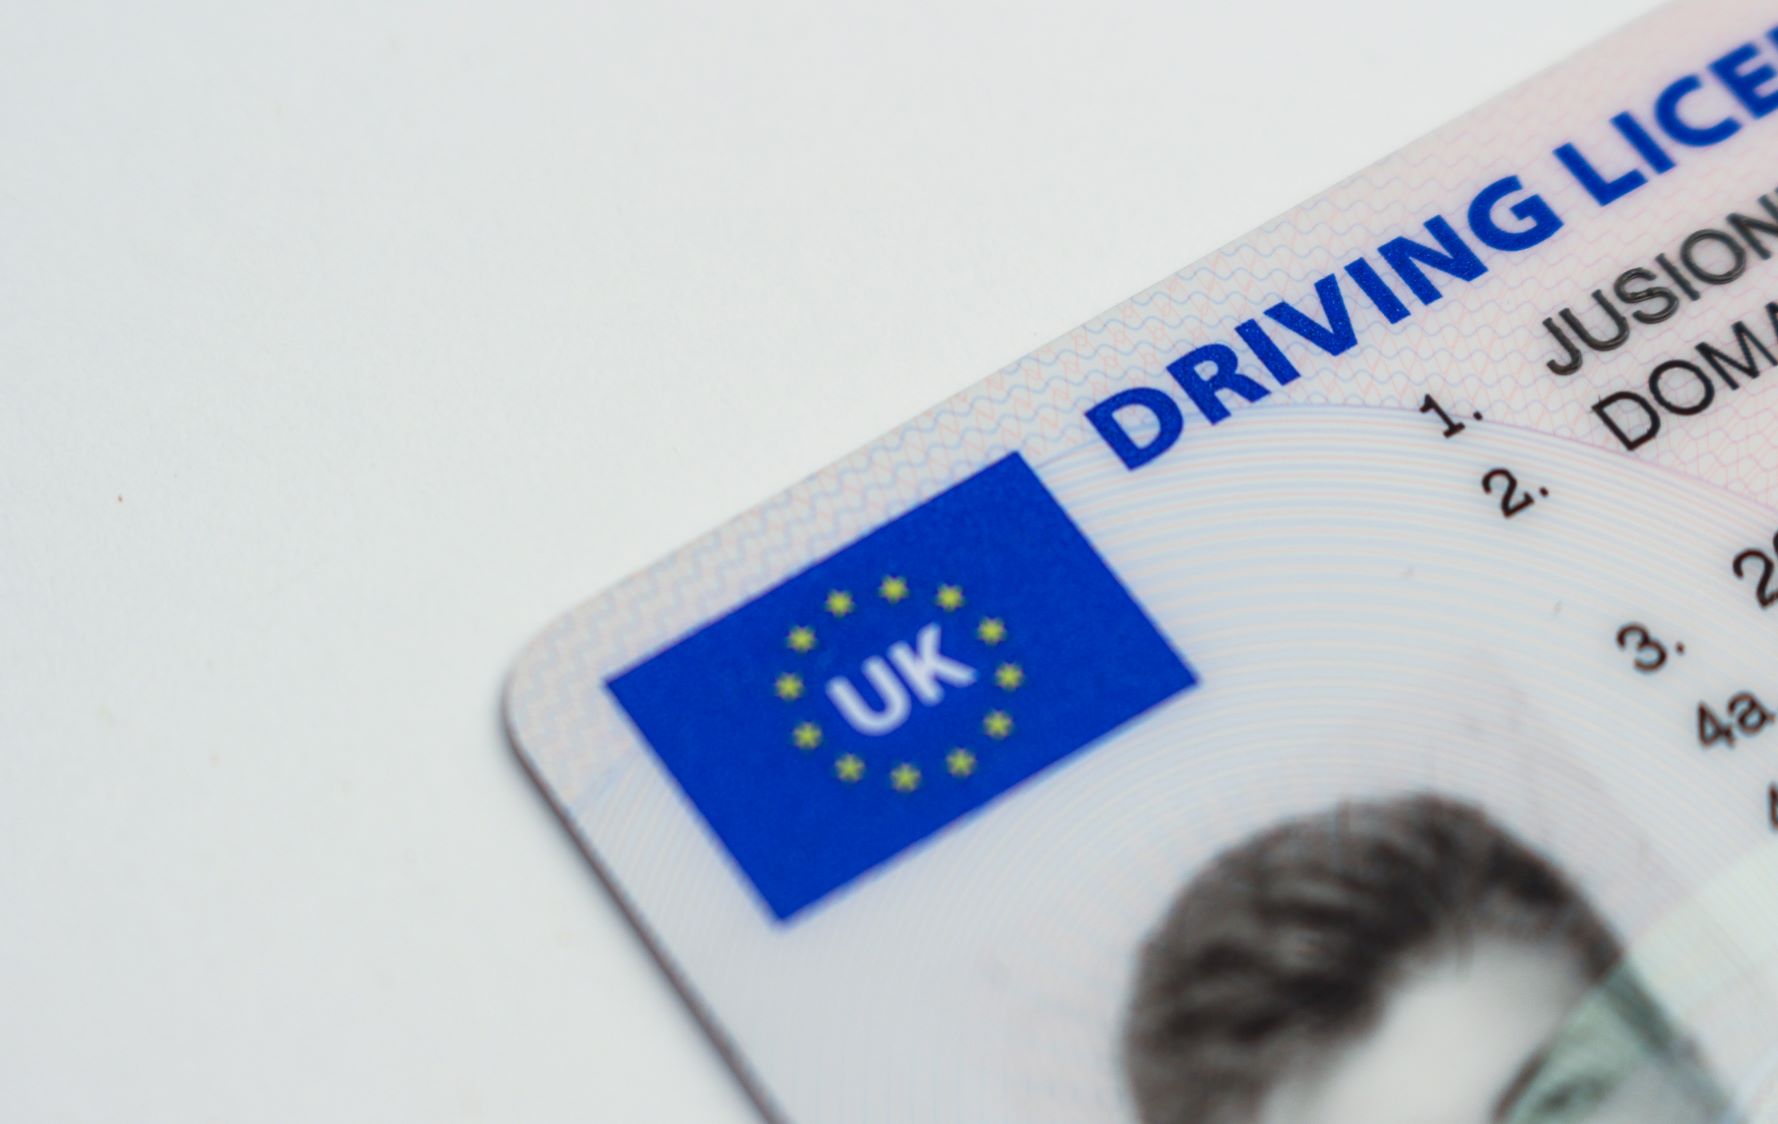 UK driving licences in Spain after 29 March 2019